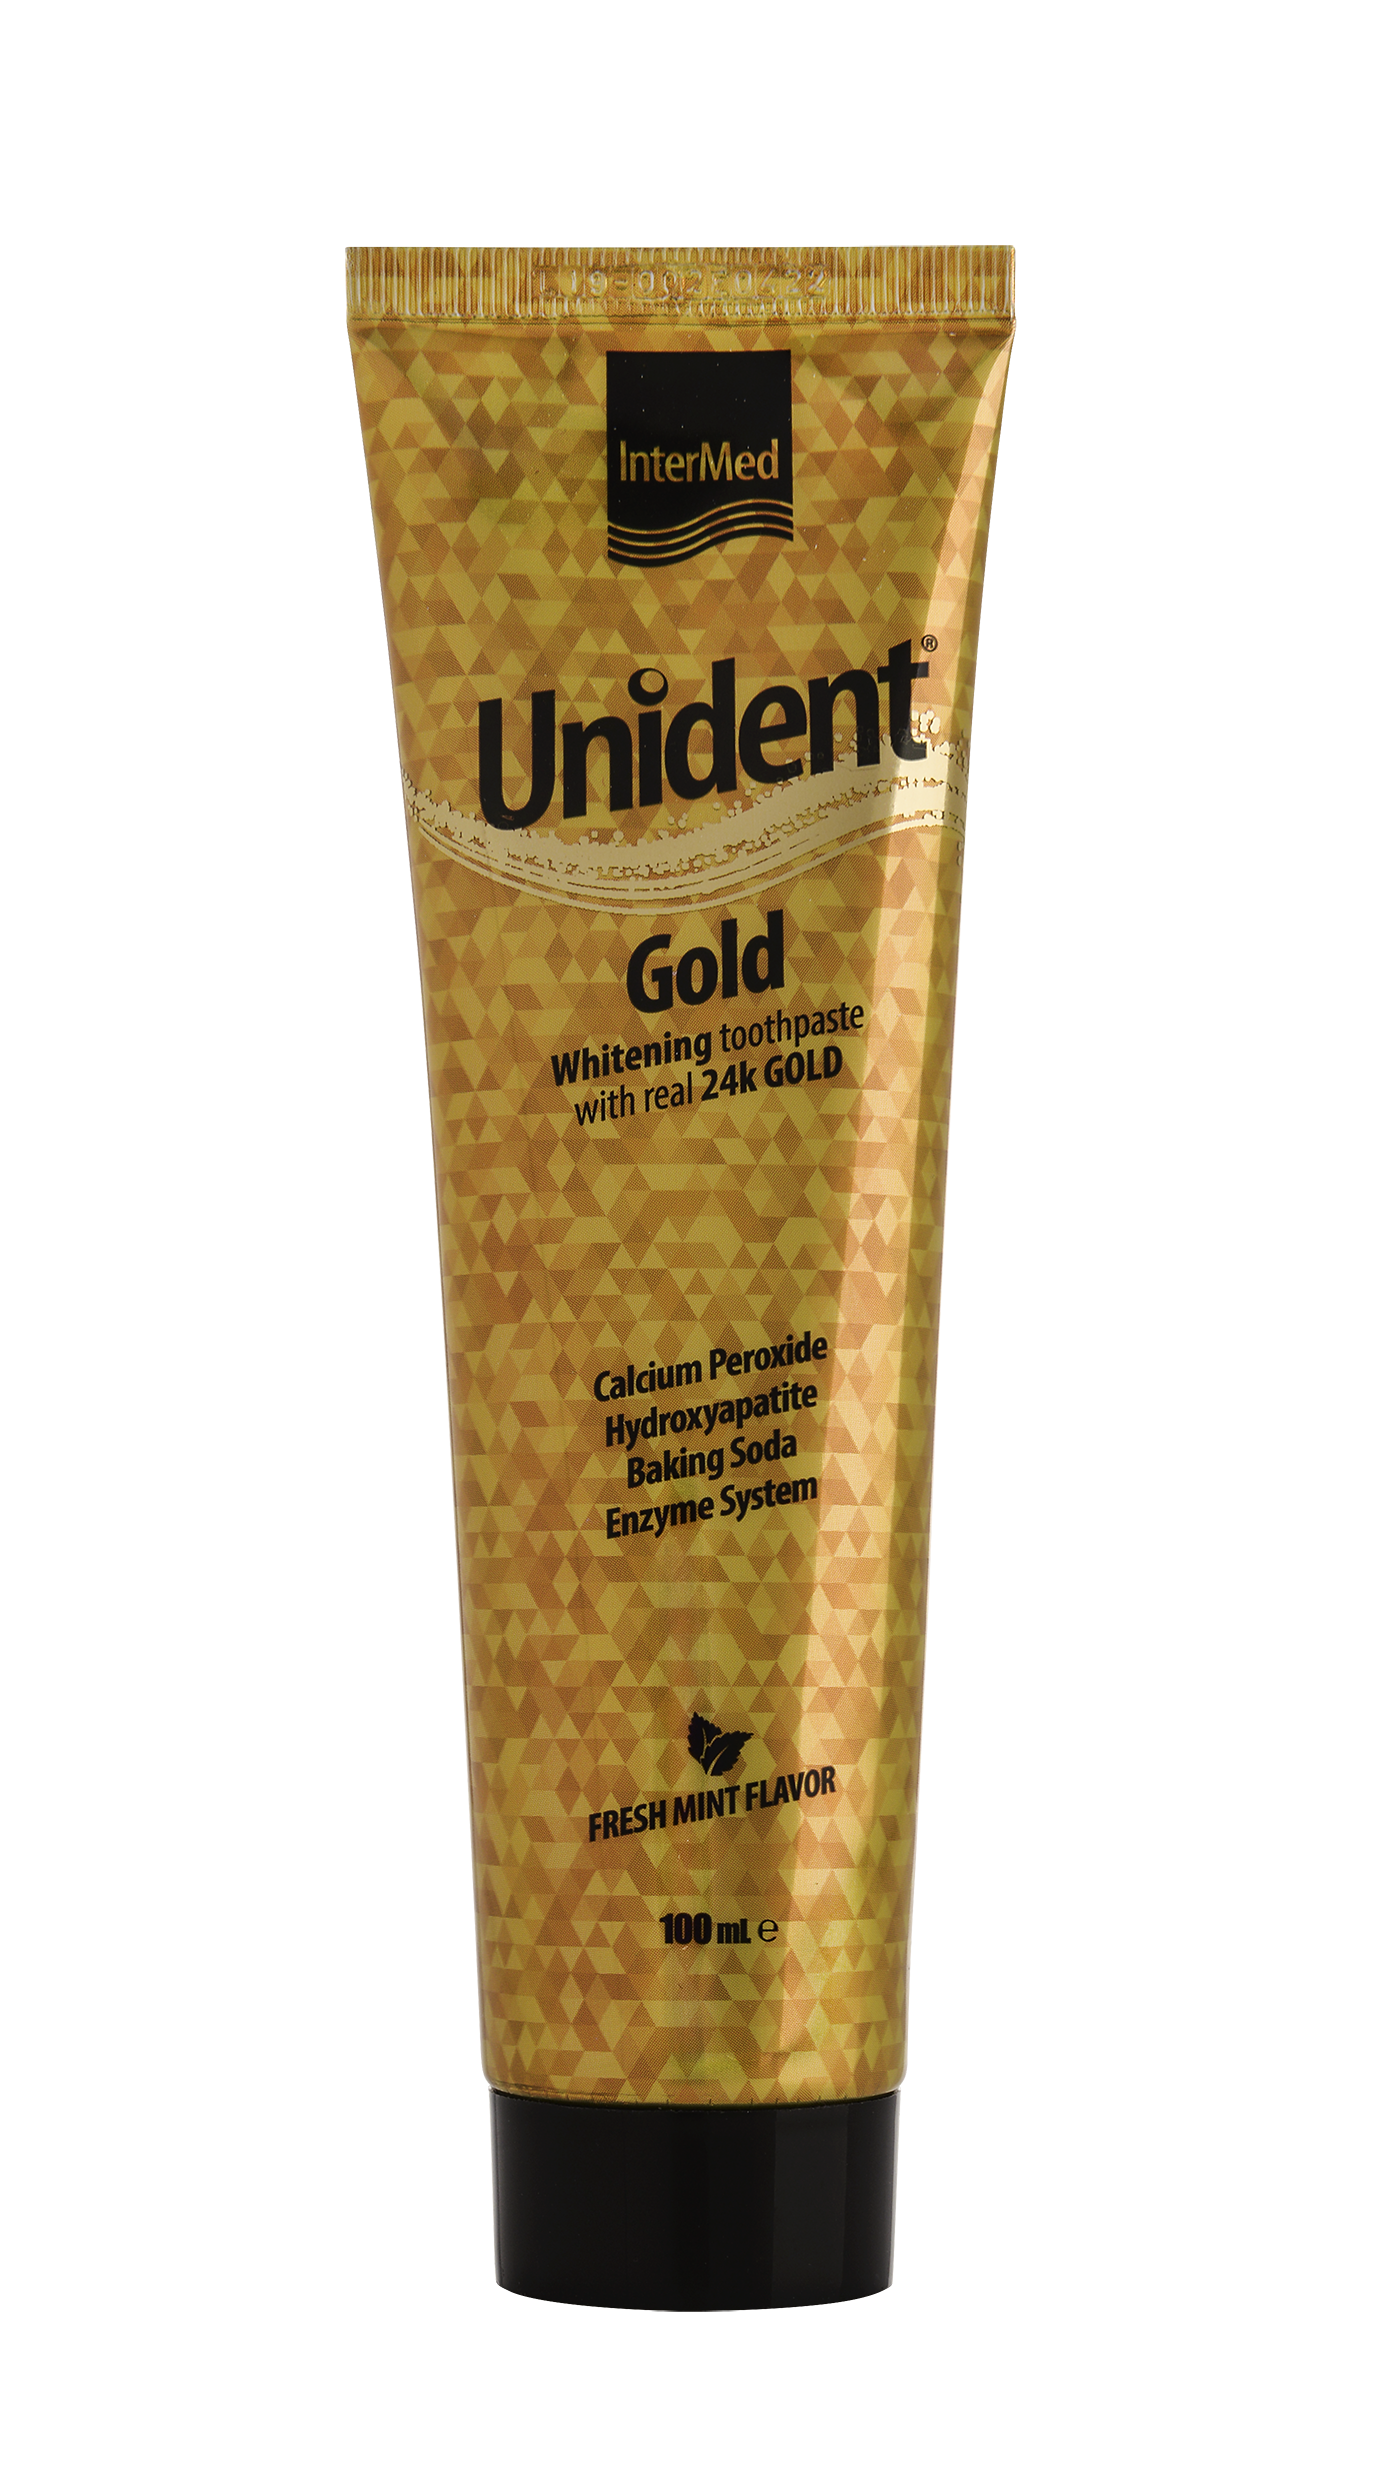 Unident gold toothpaste tube packaging